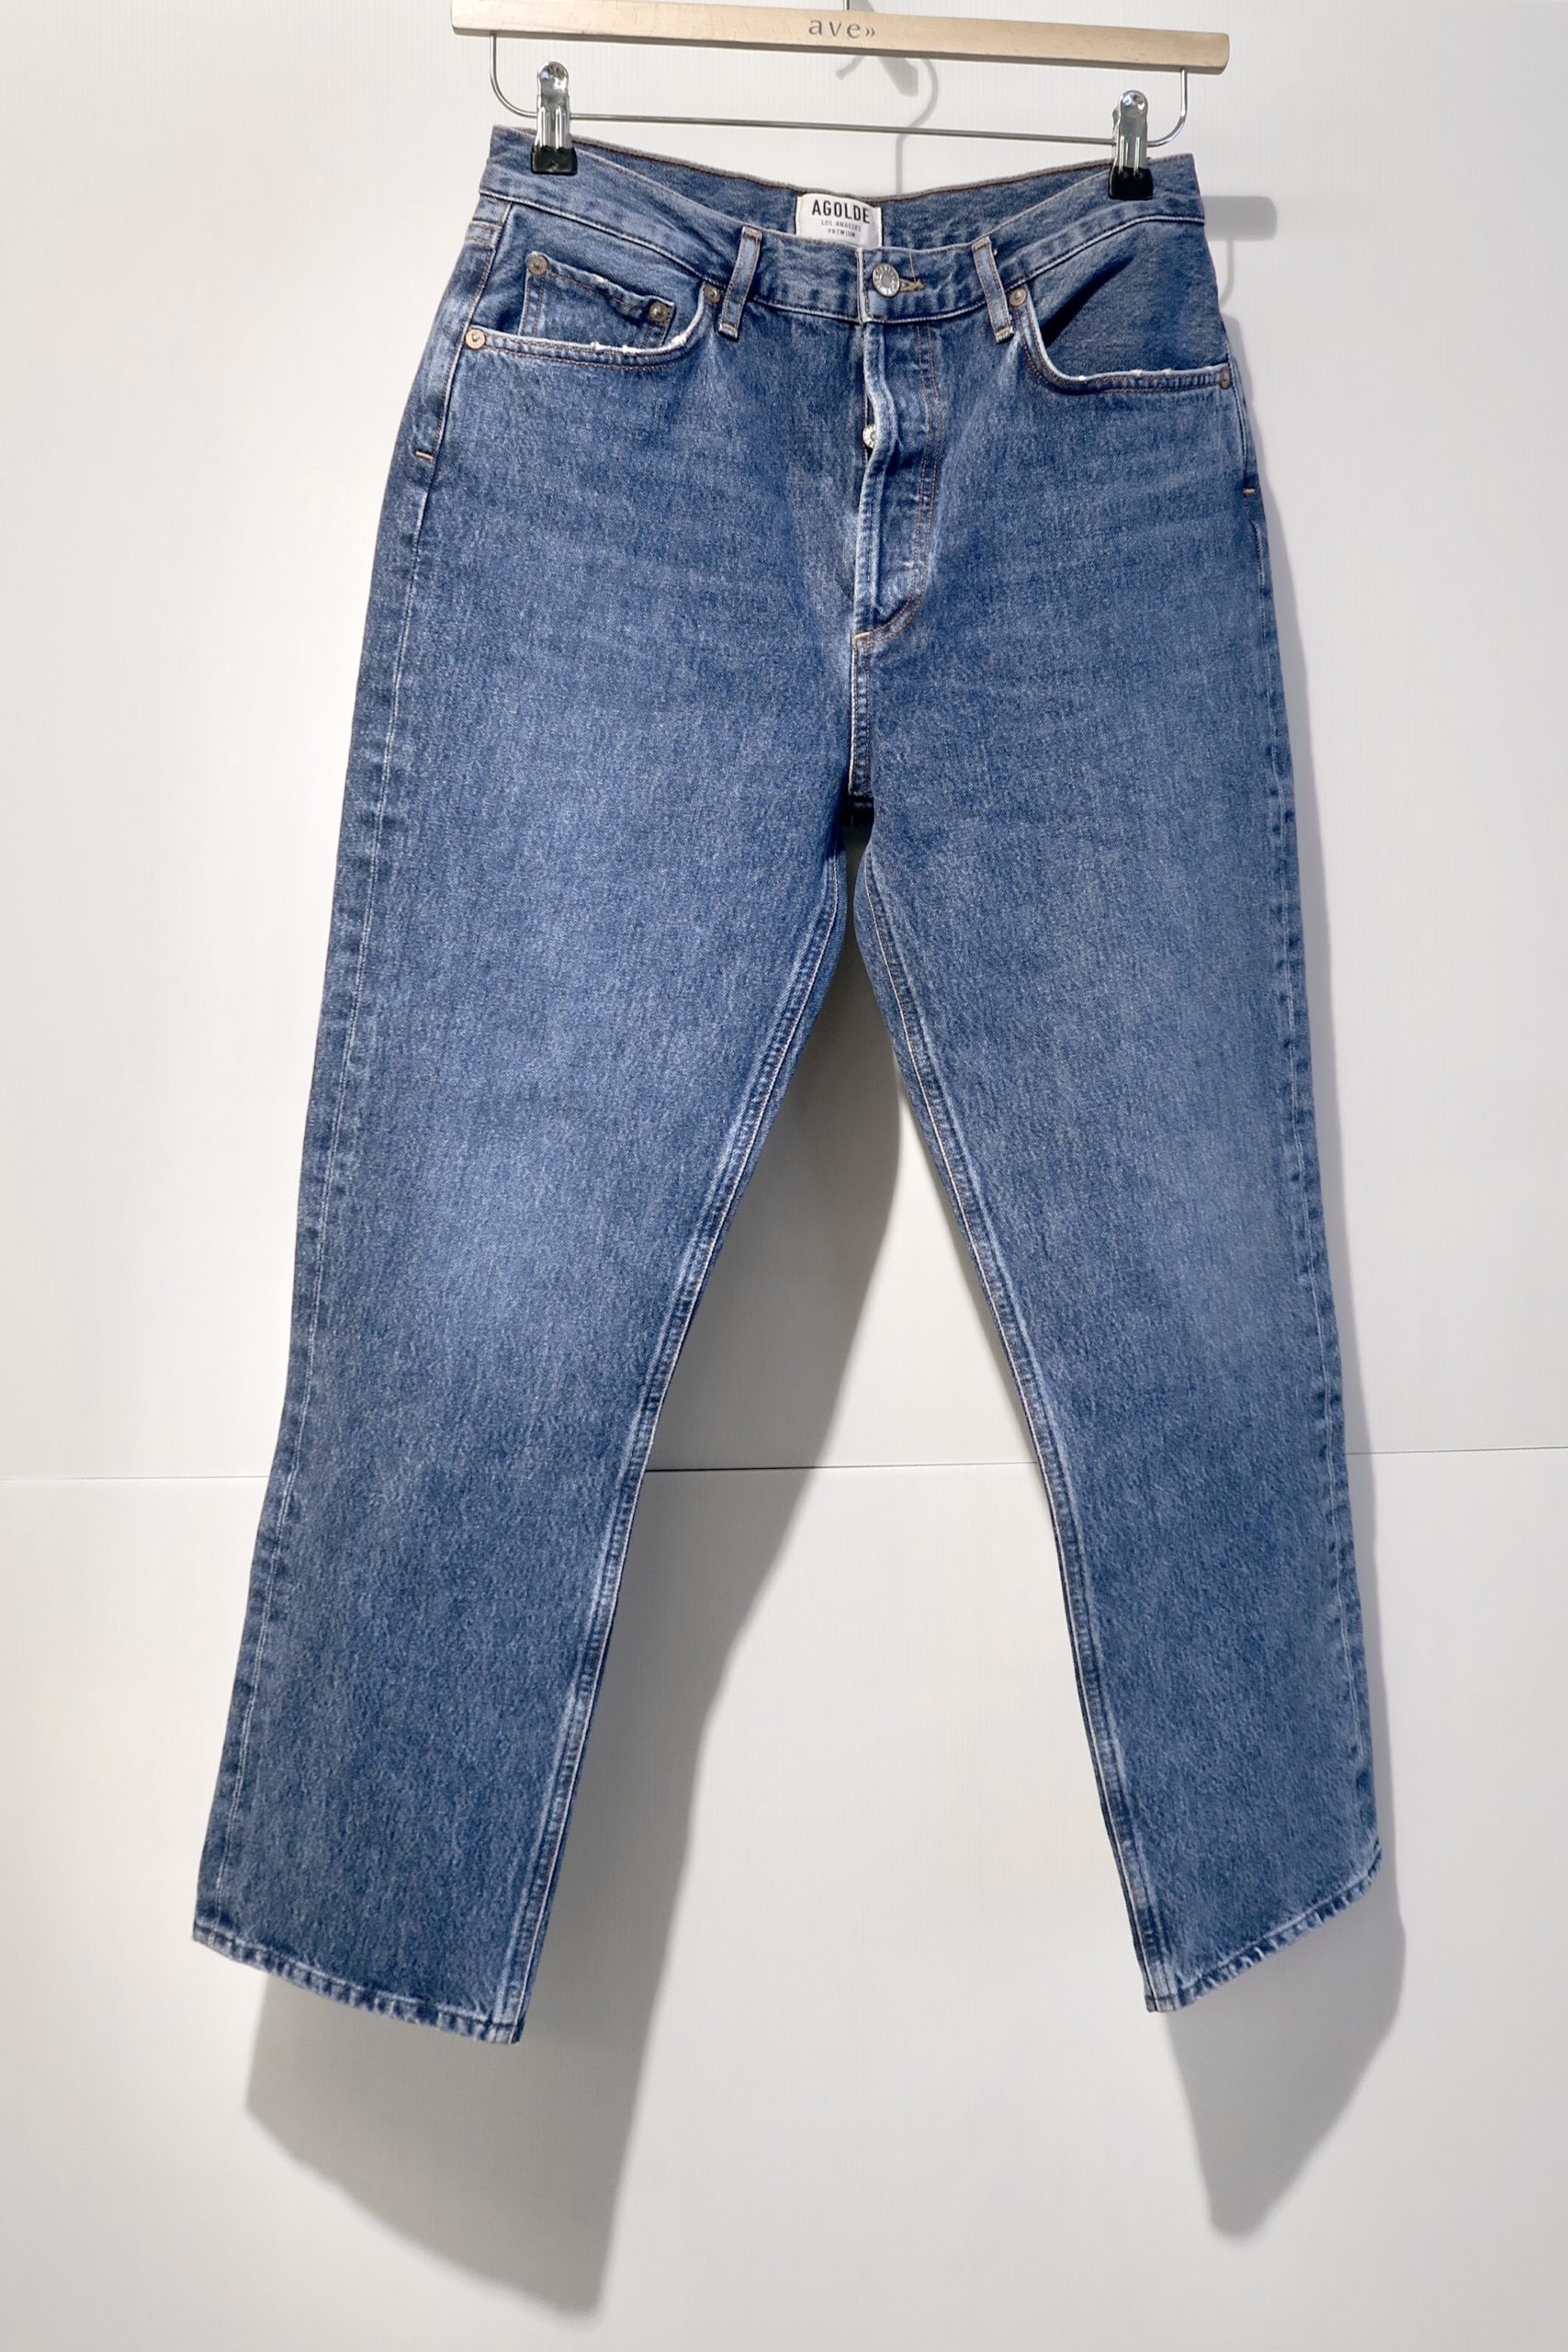 AGOLDE RILEY JEANS airblue - ave>>anziehsachen